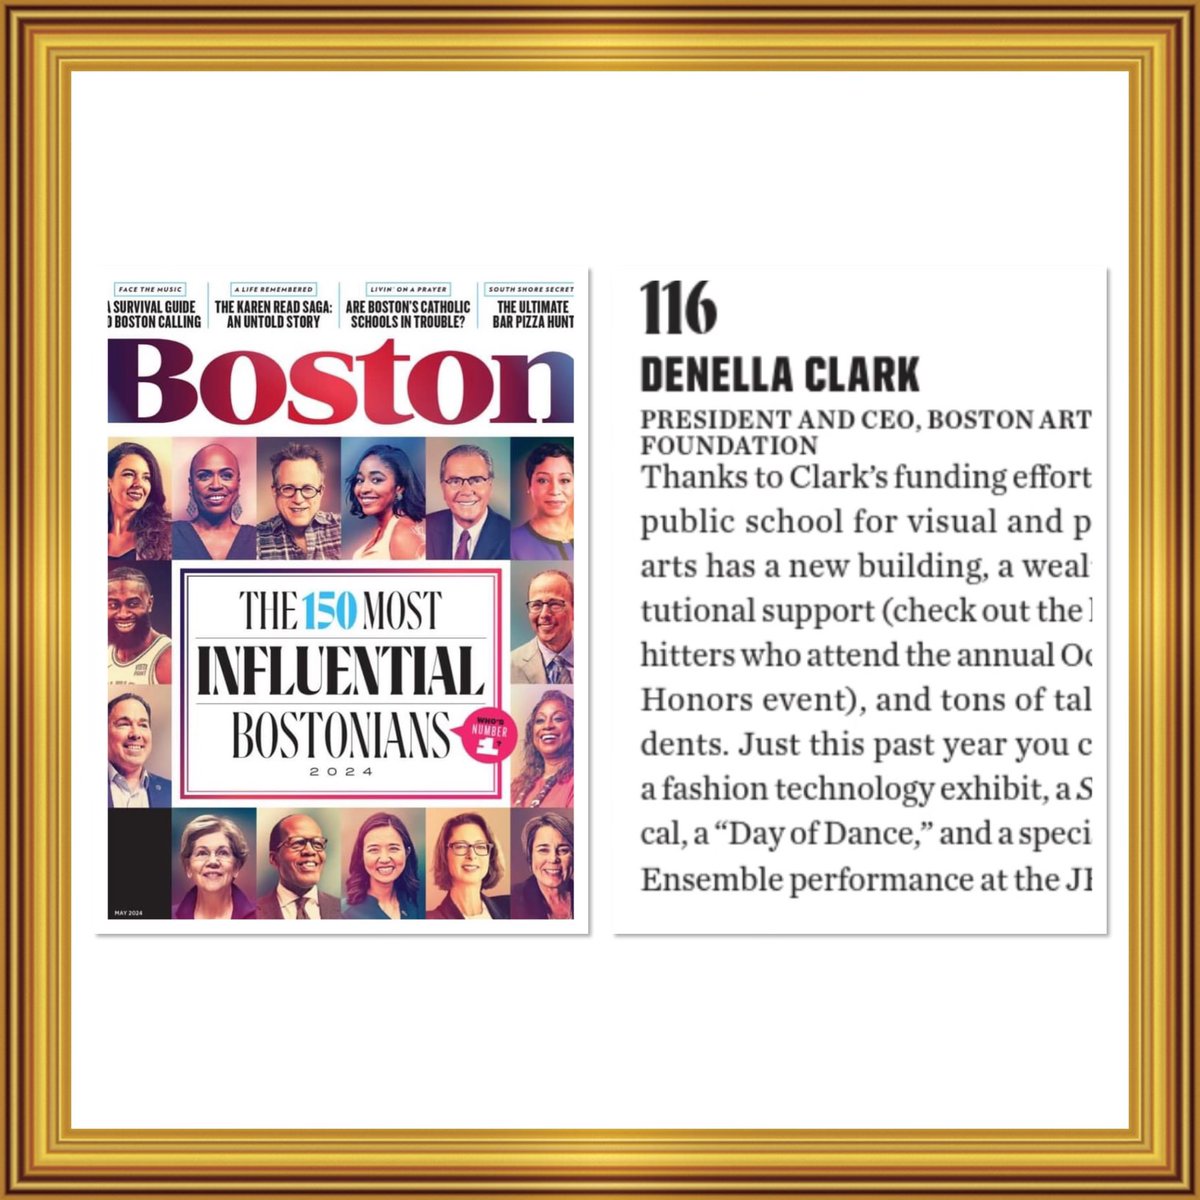 Congrats to our CEO @DenellaClark for being included in the @BostonMagazine 150 Most Influential Bostonians! Denella joins an impressive list including BAAF Chairman Emeritus @LeePelton, BAAF Honorary Campaign Chair, @MayorWu, and BAA HONORS 2024 Honoree, Christy Cashman.